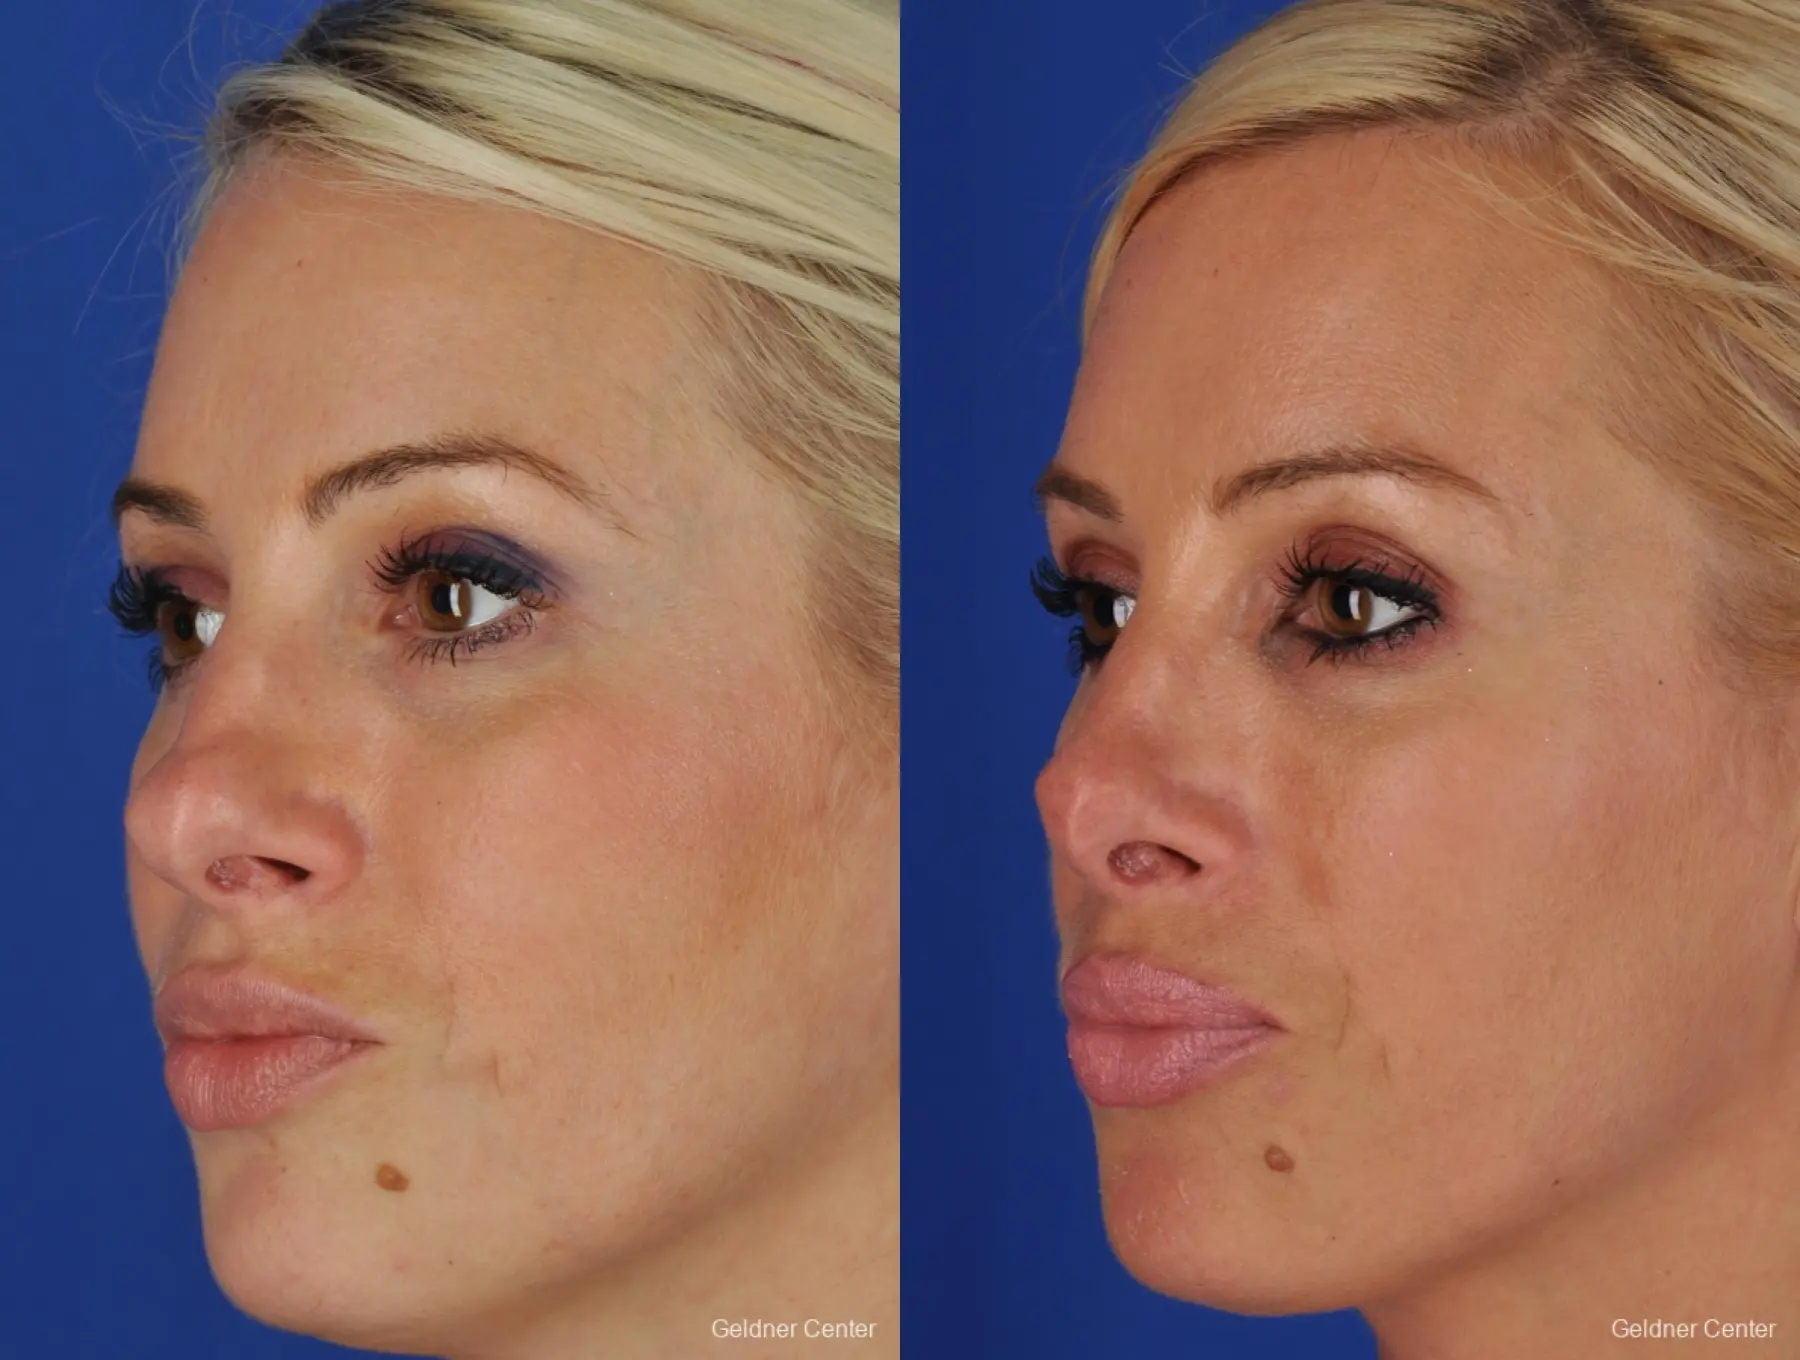 Chicago Rhinoplasty - Before and After 4